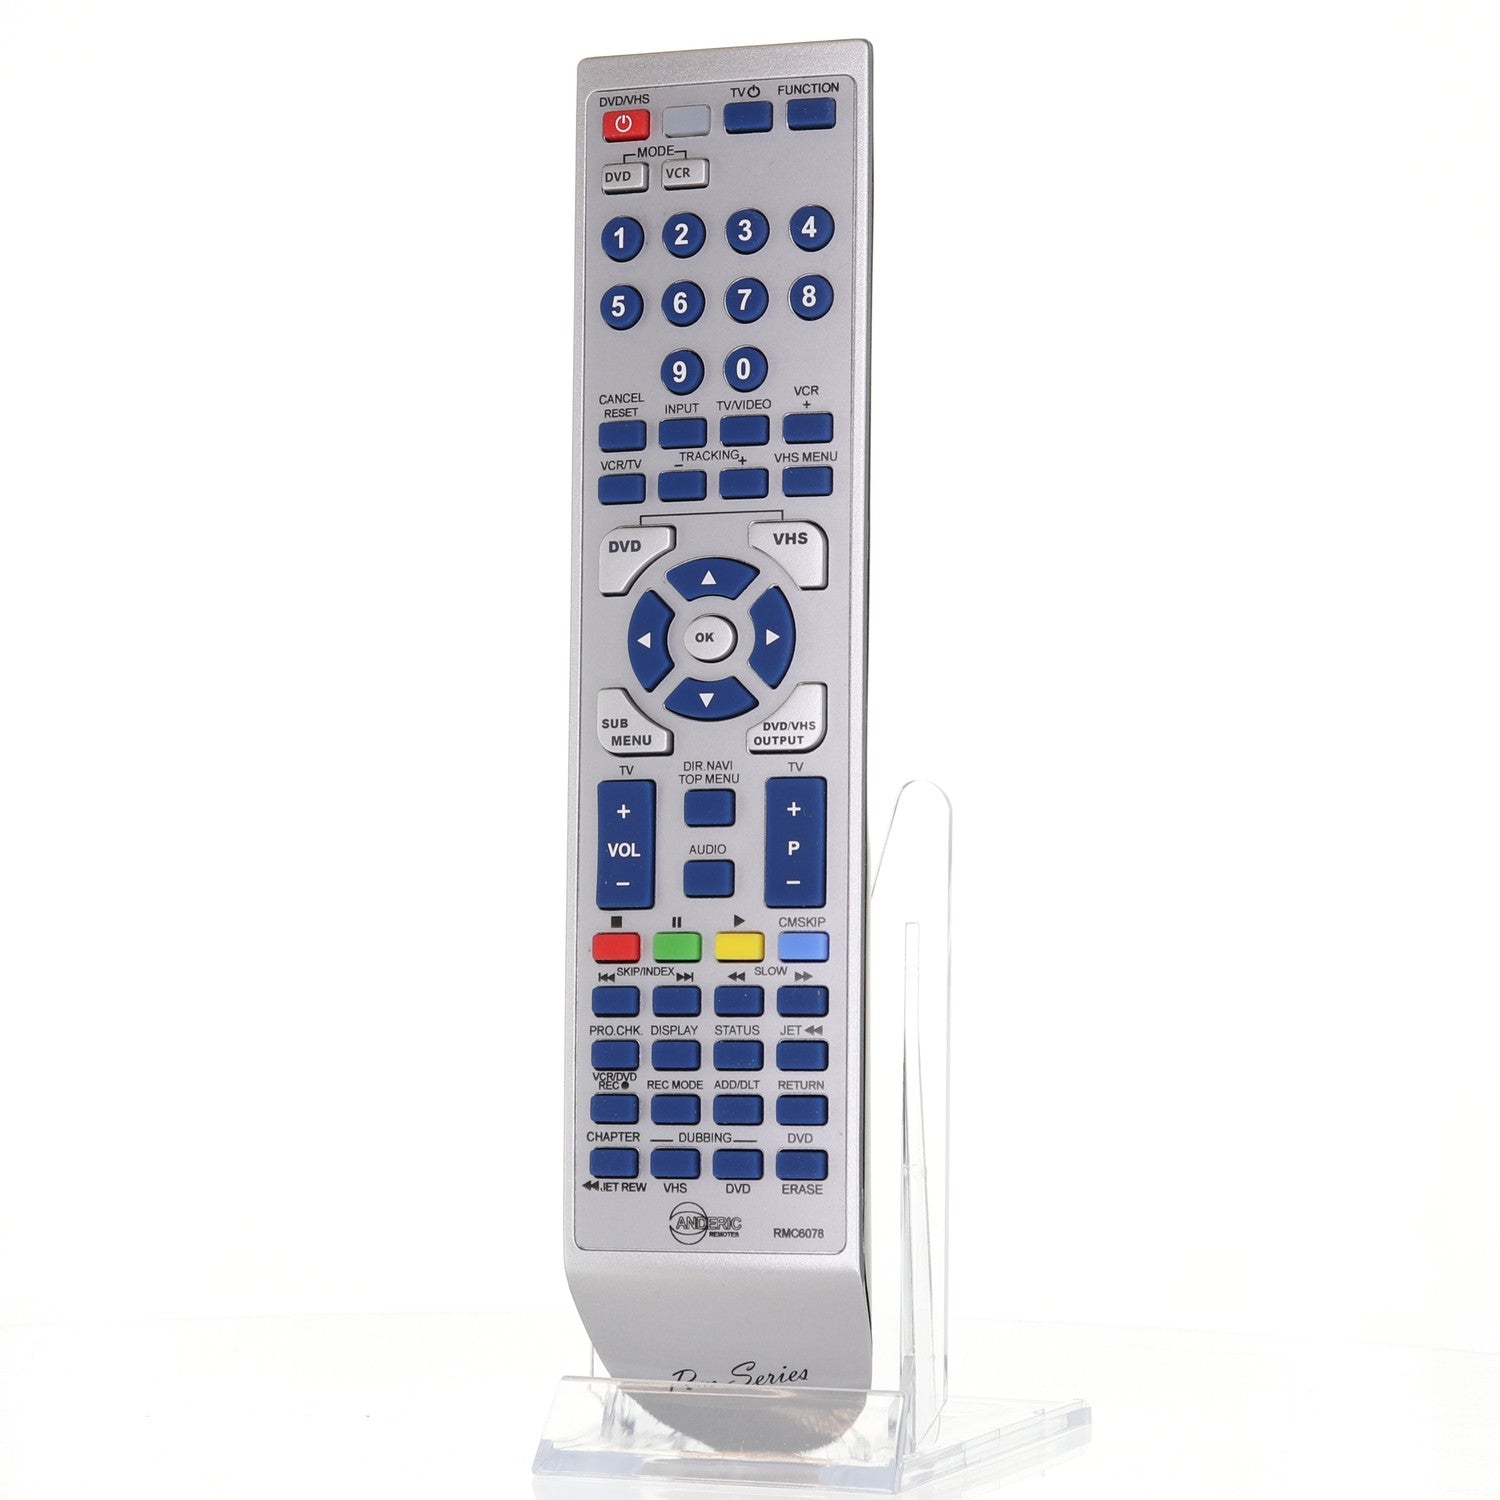 RMC6078 (EUR7721X10) Remote Control for Panasonic DVD/VCR Recorders